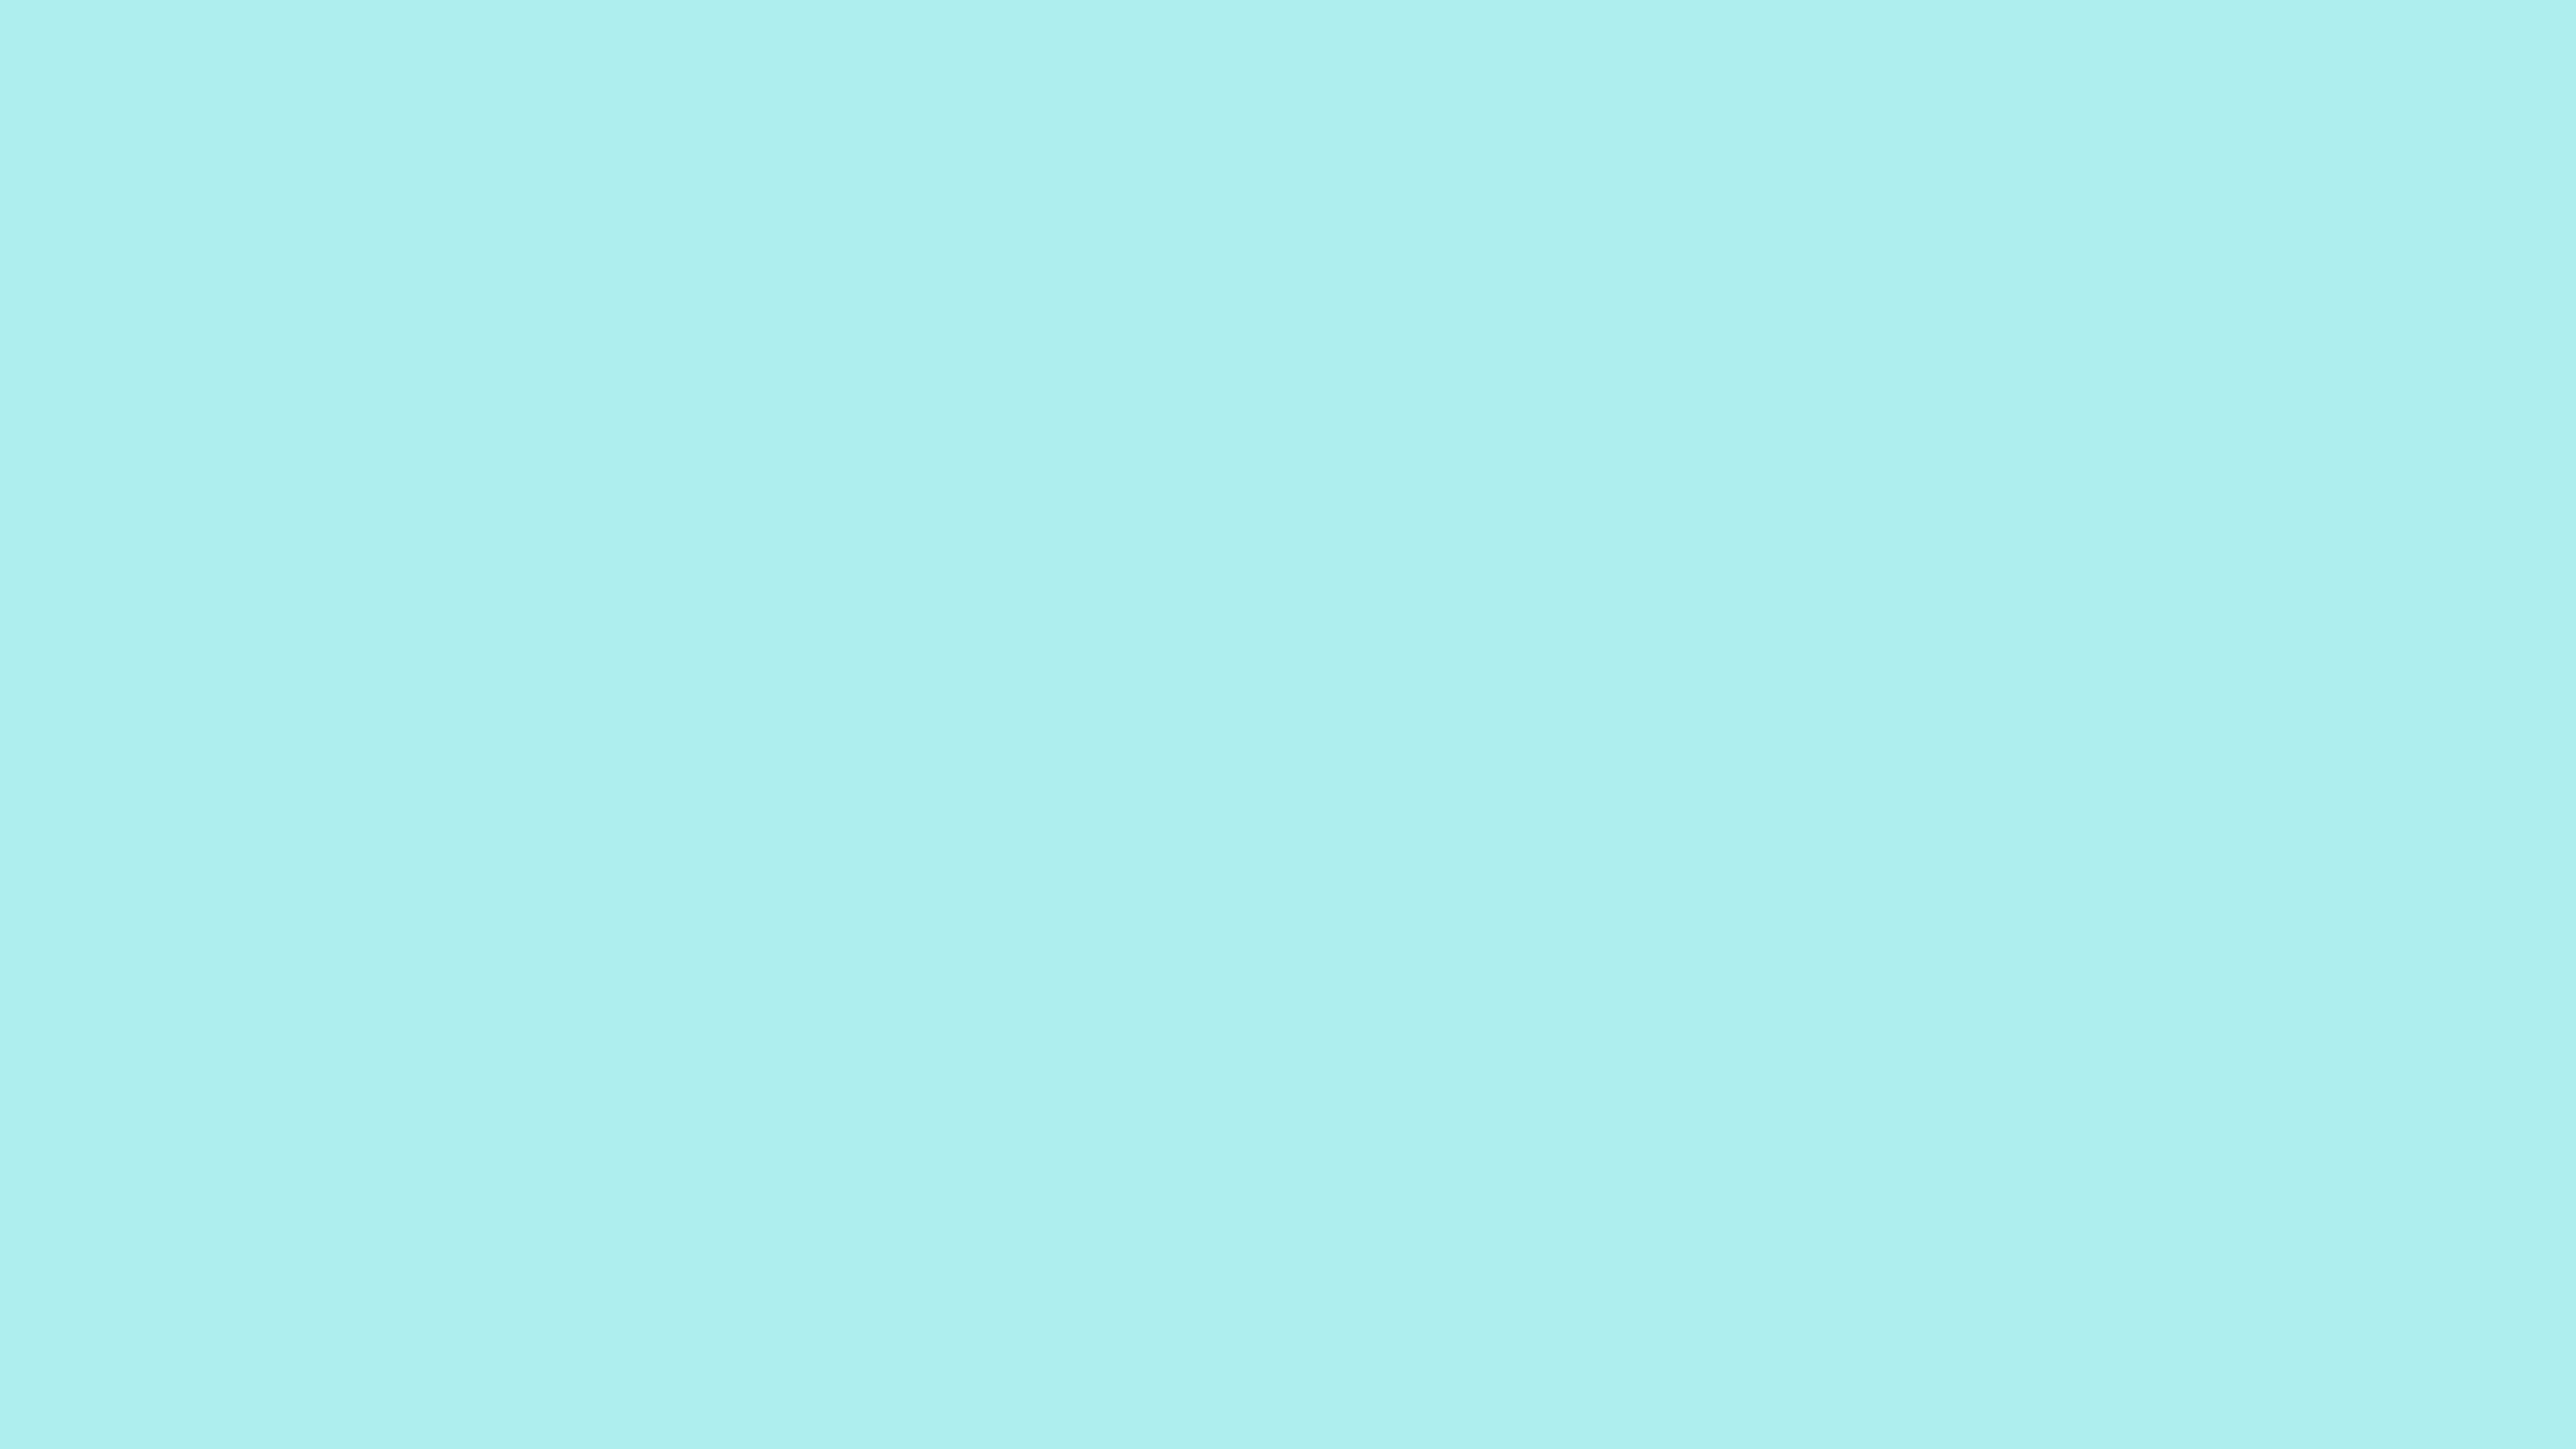 4096x2304 Pale Turquoise Solid Color Background